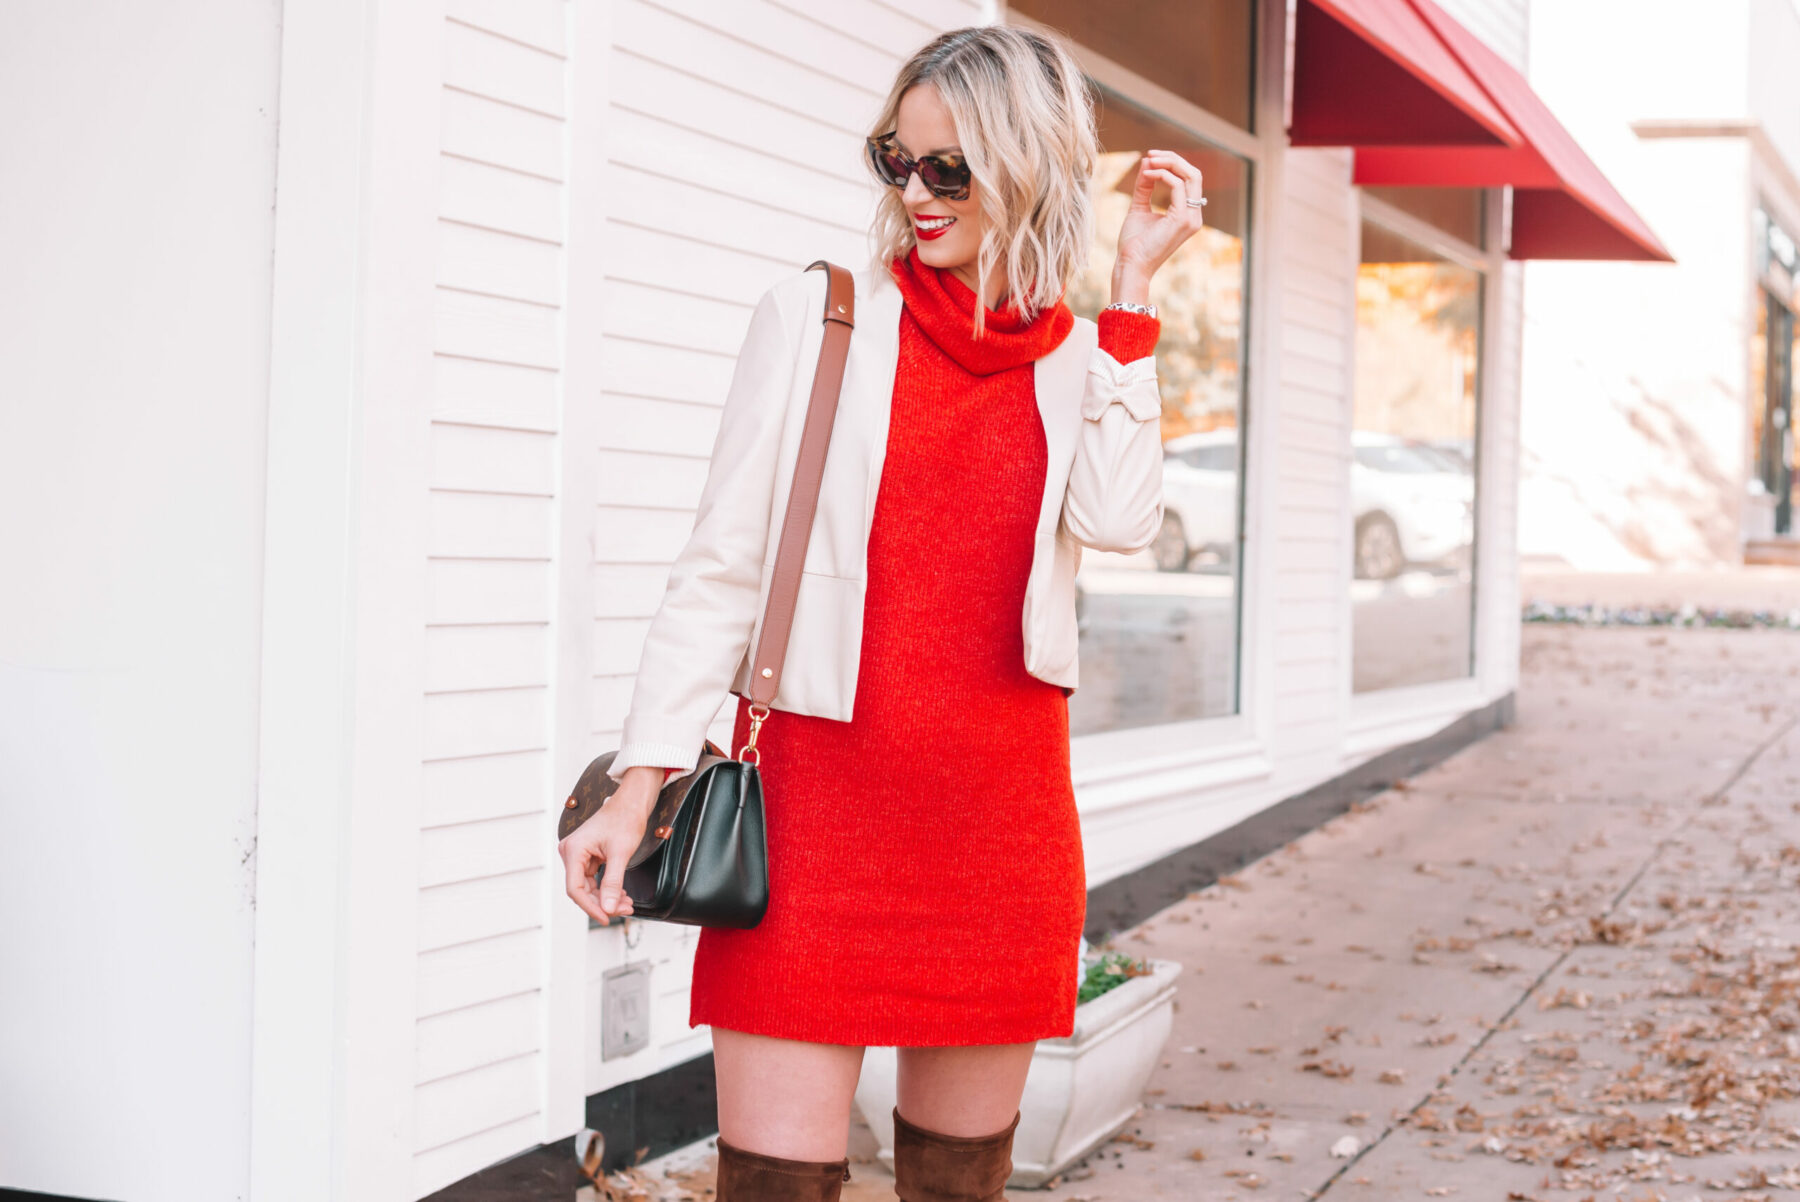 Red Coat Outfit Inspiration - Meagan's Moda